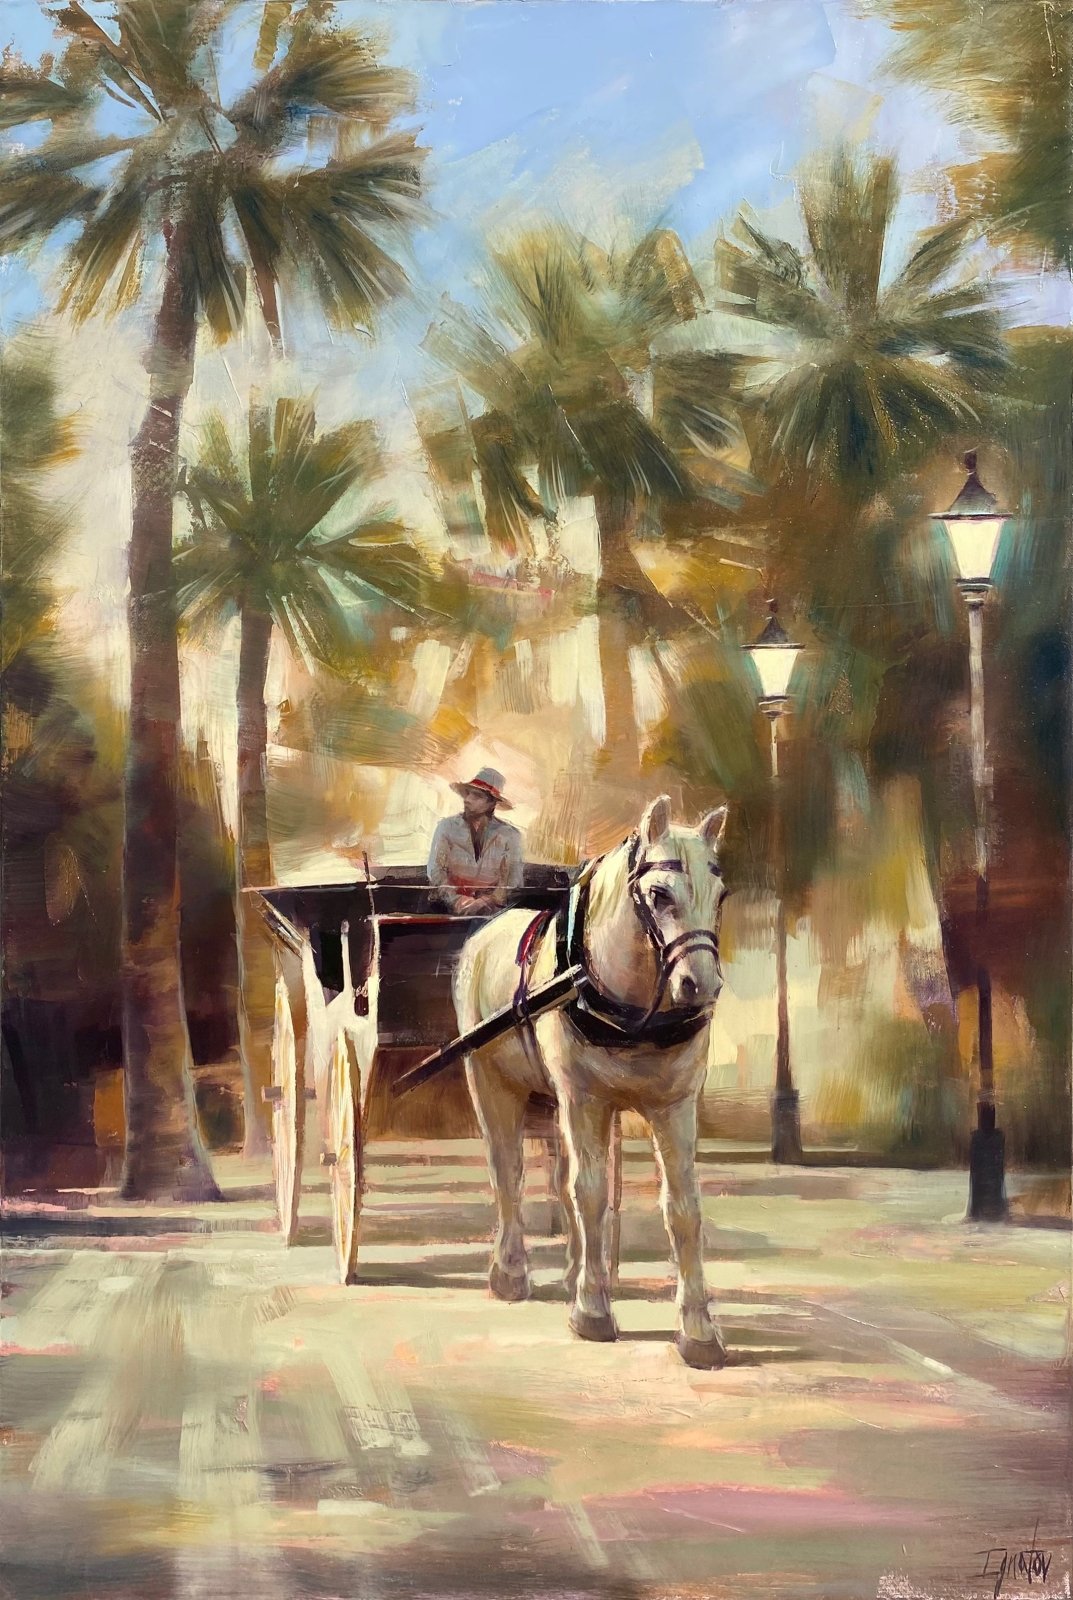 Afternoon in Charleston by Ignat Ignatov at LePrince Galleries